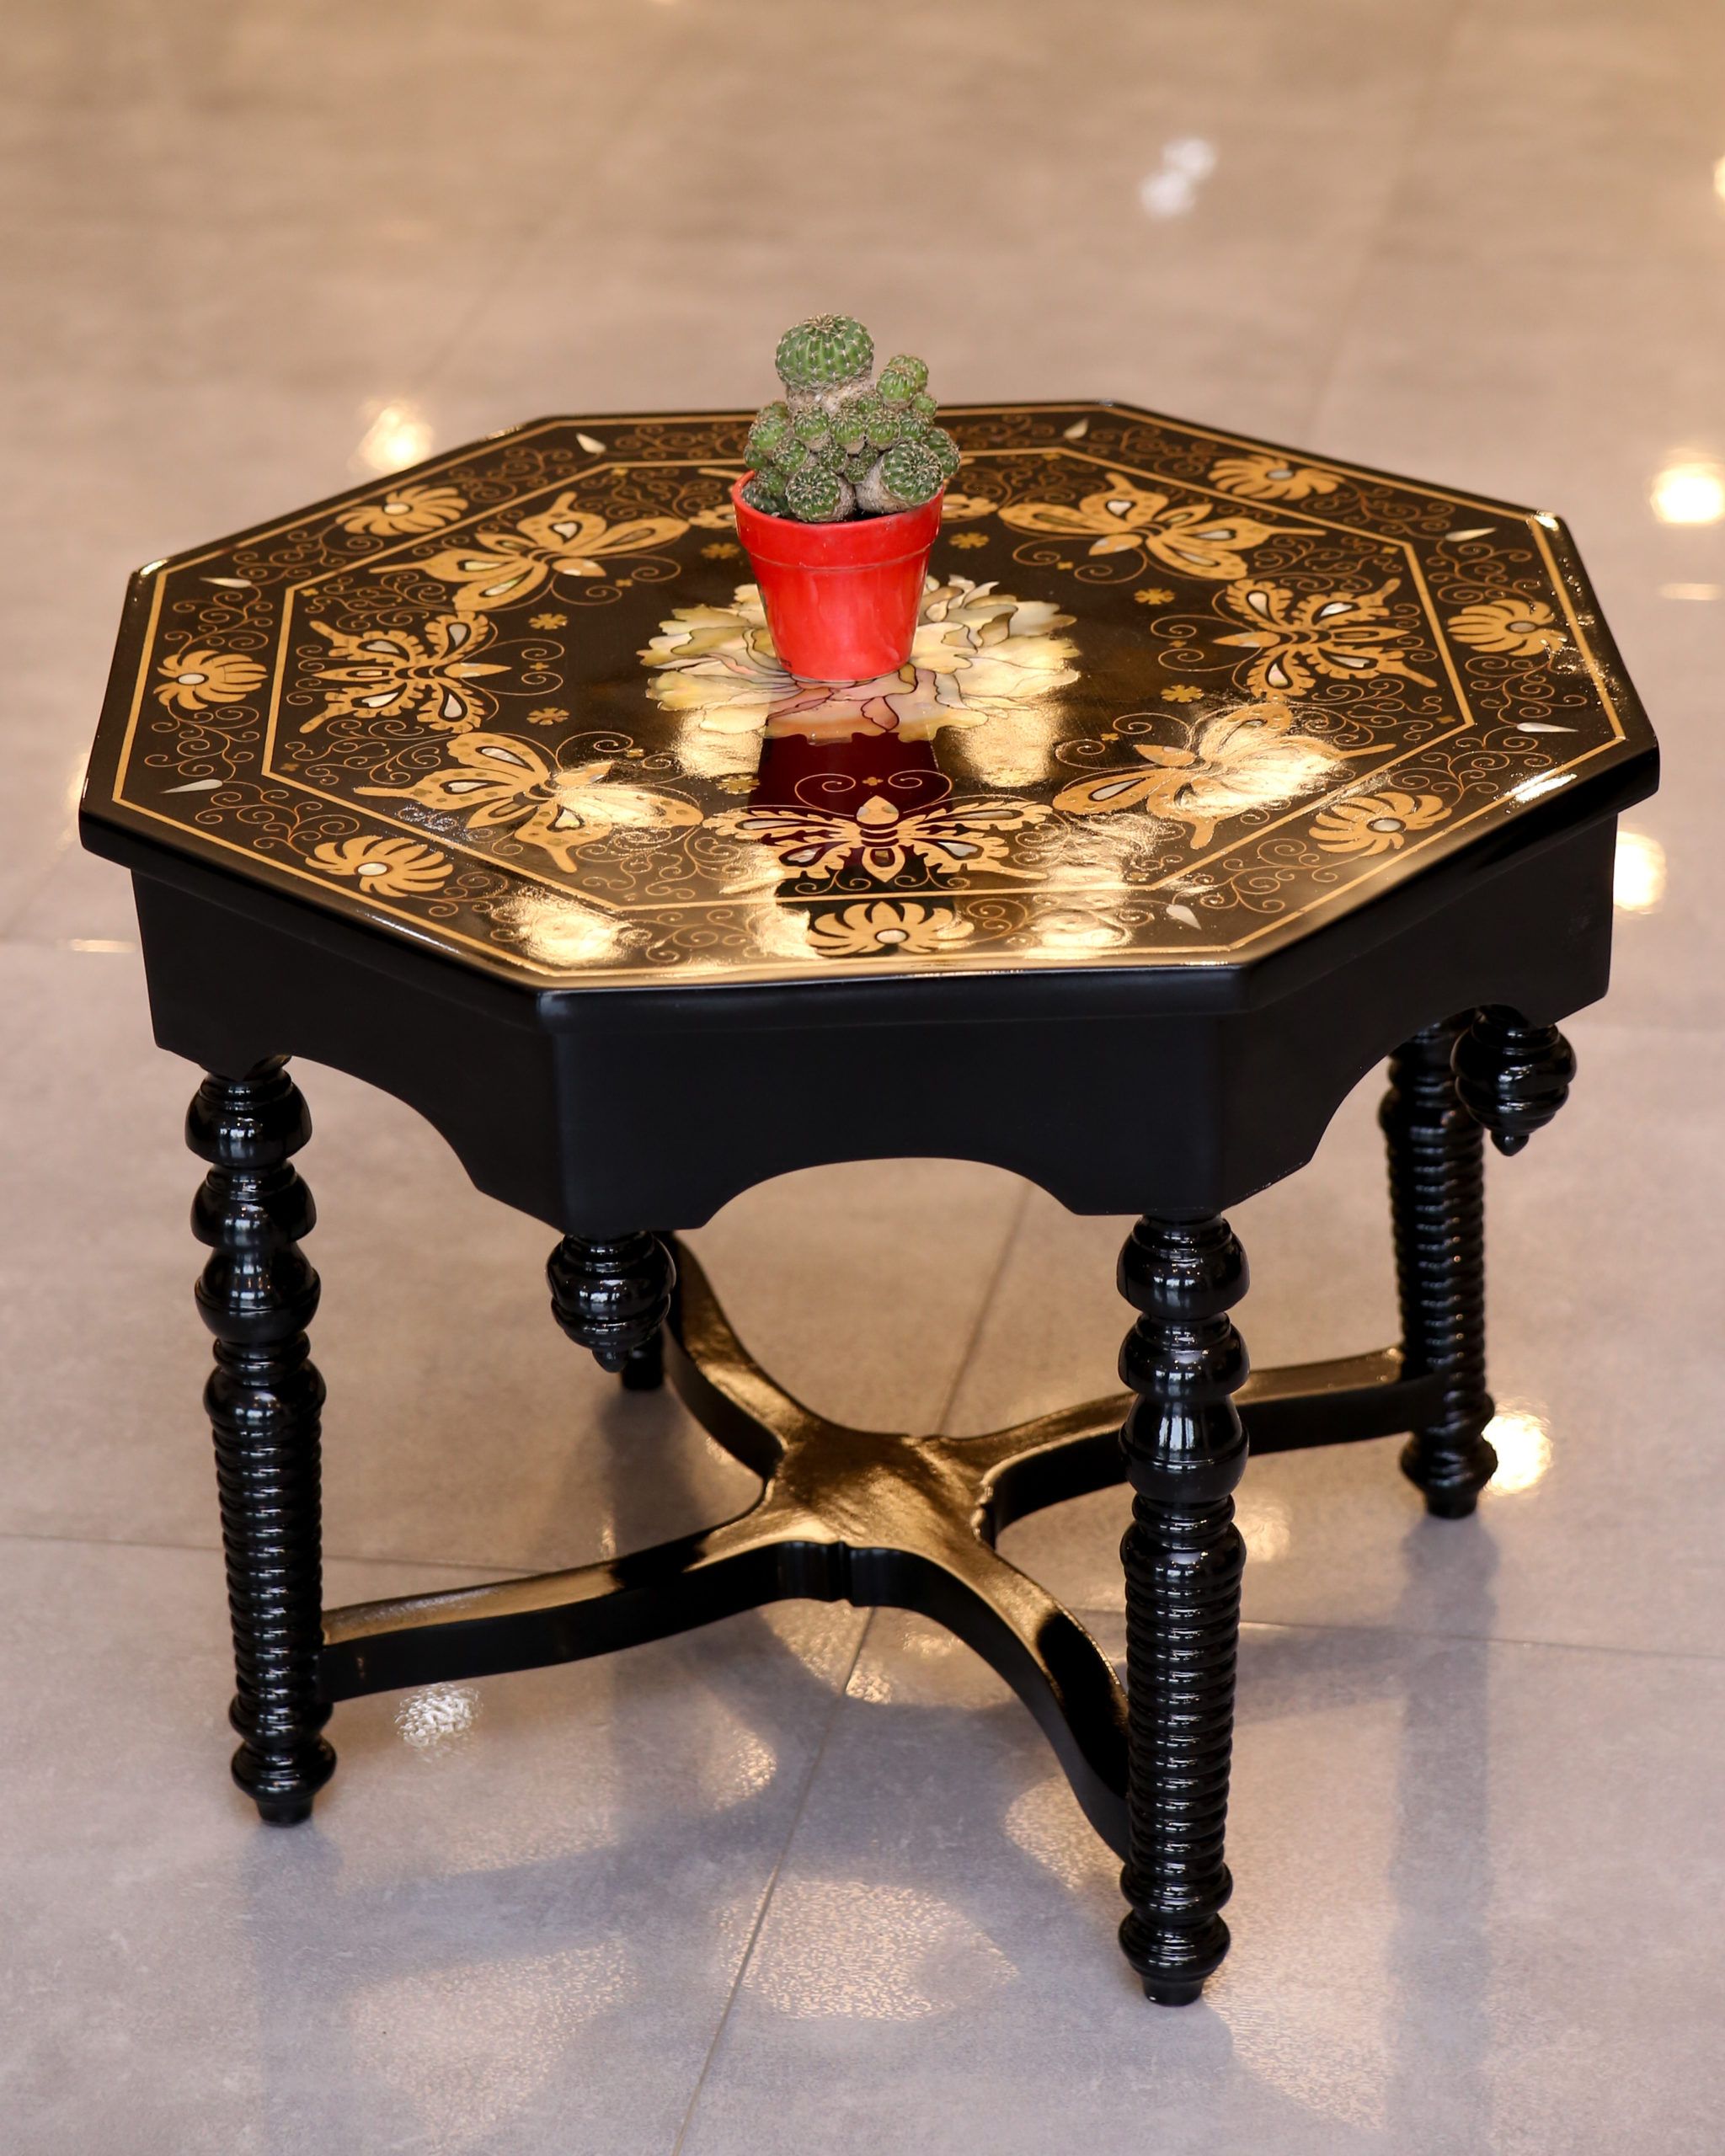 Antique Gold And Glass Coffee Tables Regarding Current Antique Black And Gold Coffee Table (View 4 of 20)